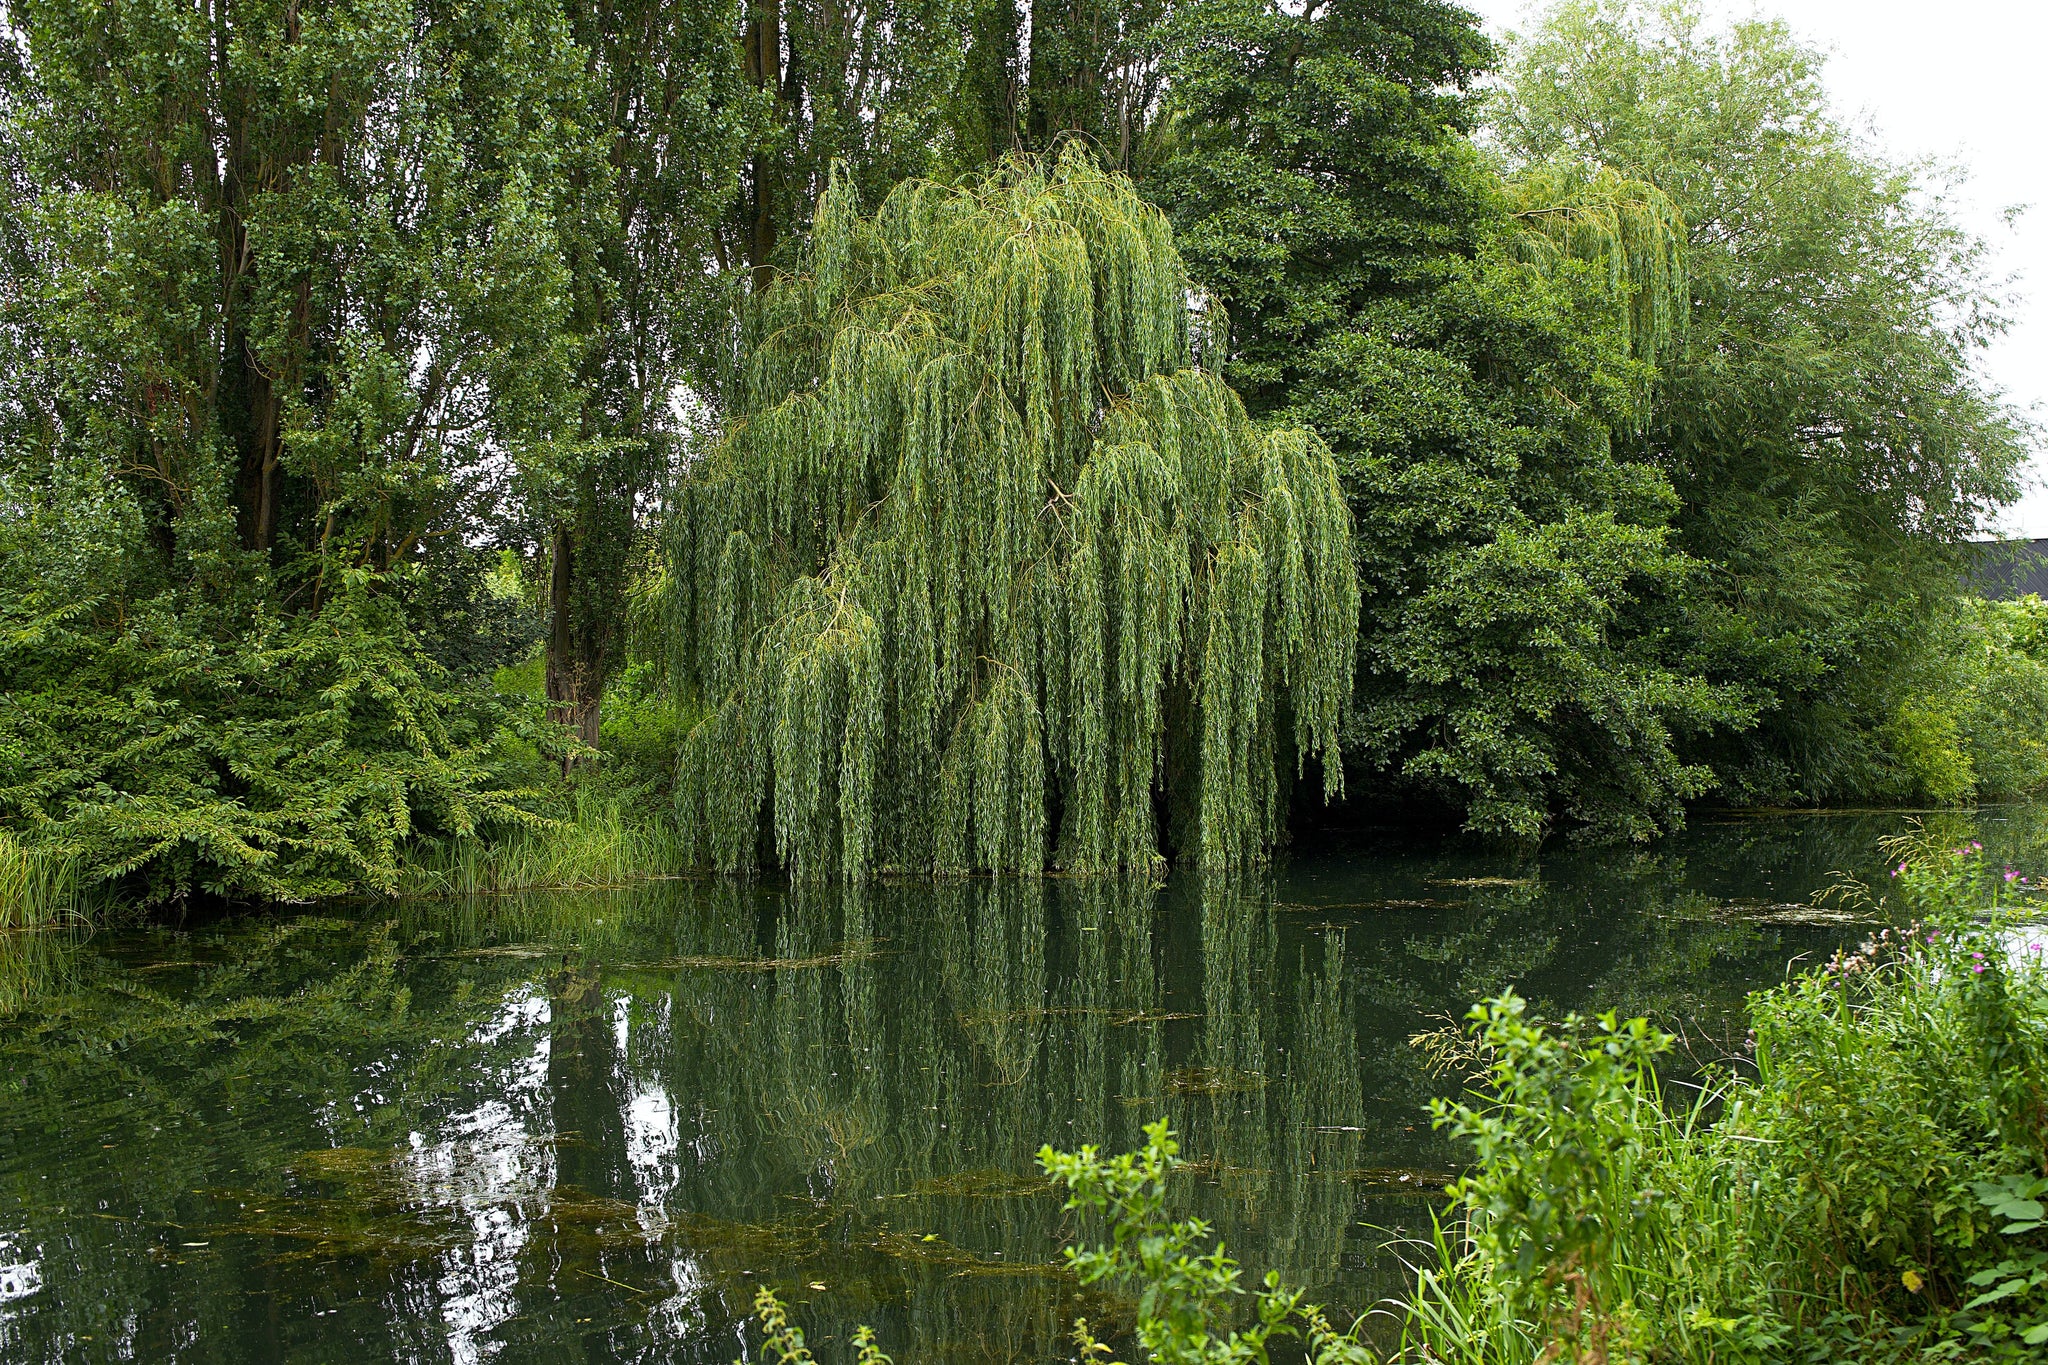 Weeping Willow Trees